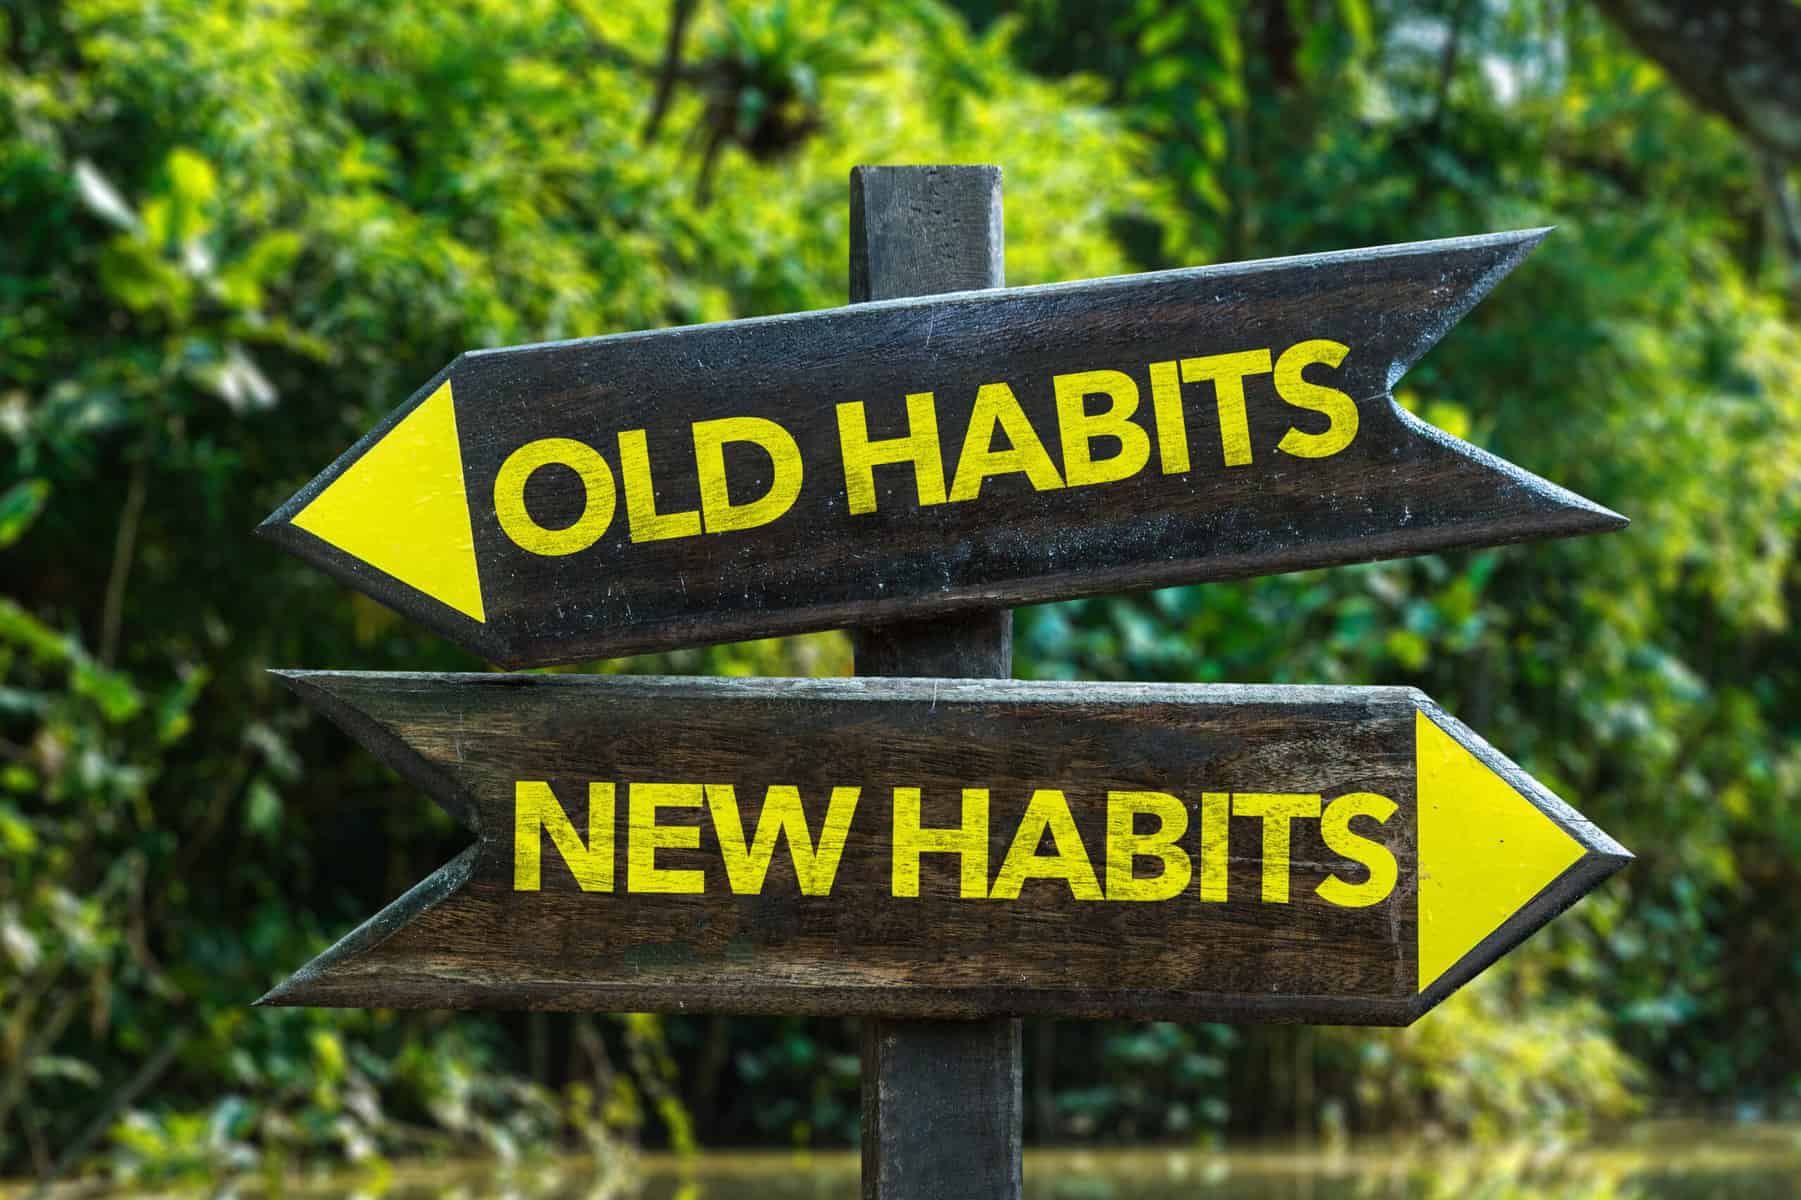 How to stop a habit: Old habits arrow pointing one way, new habits arrow pointing the other.